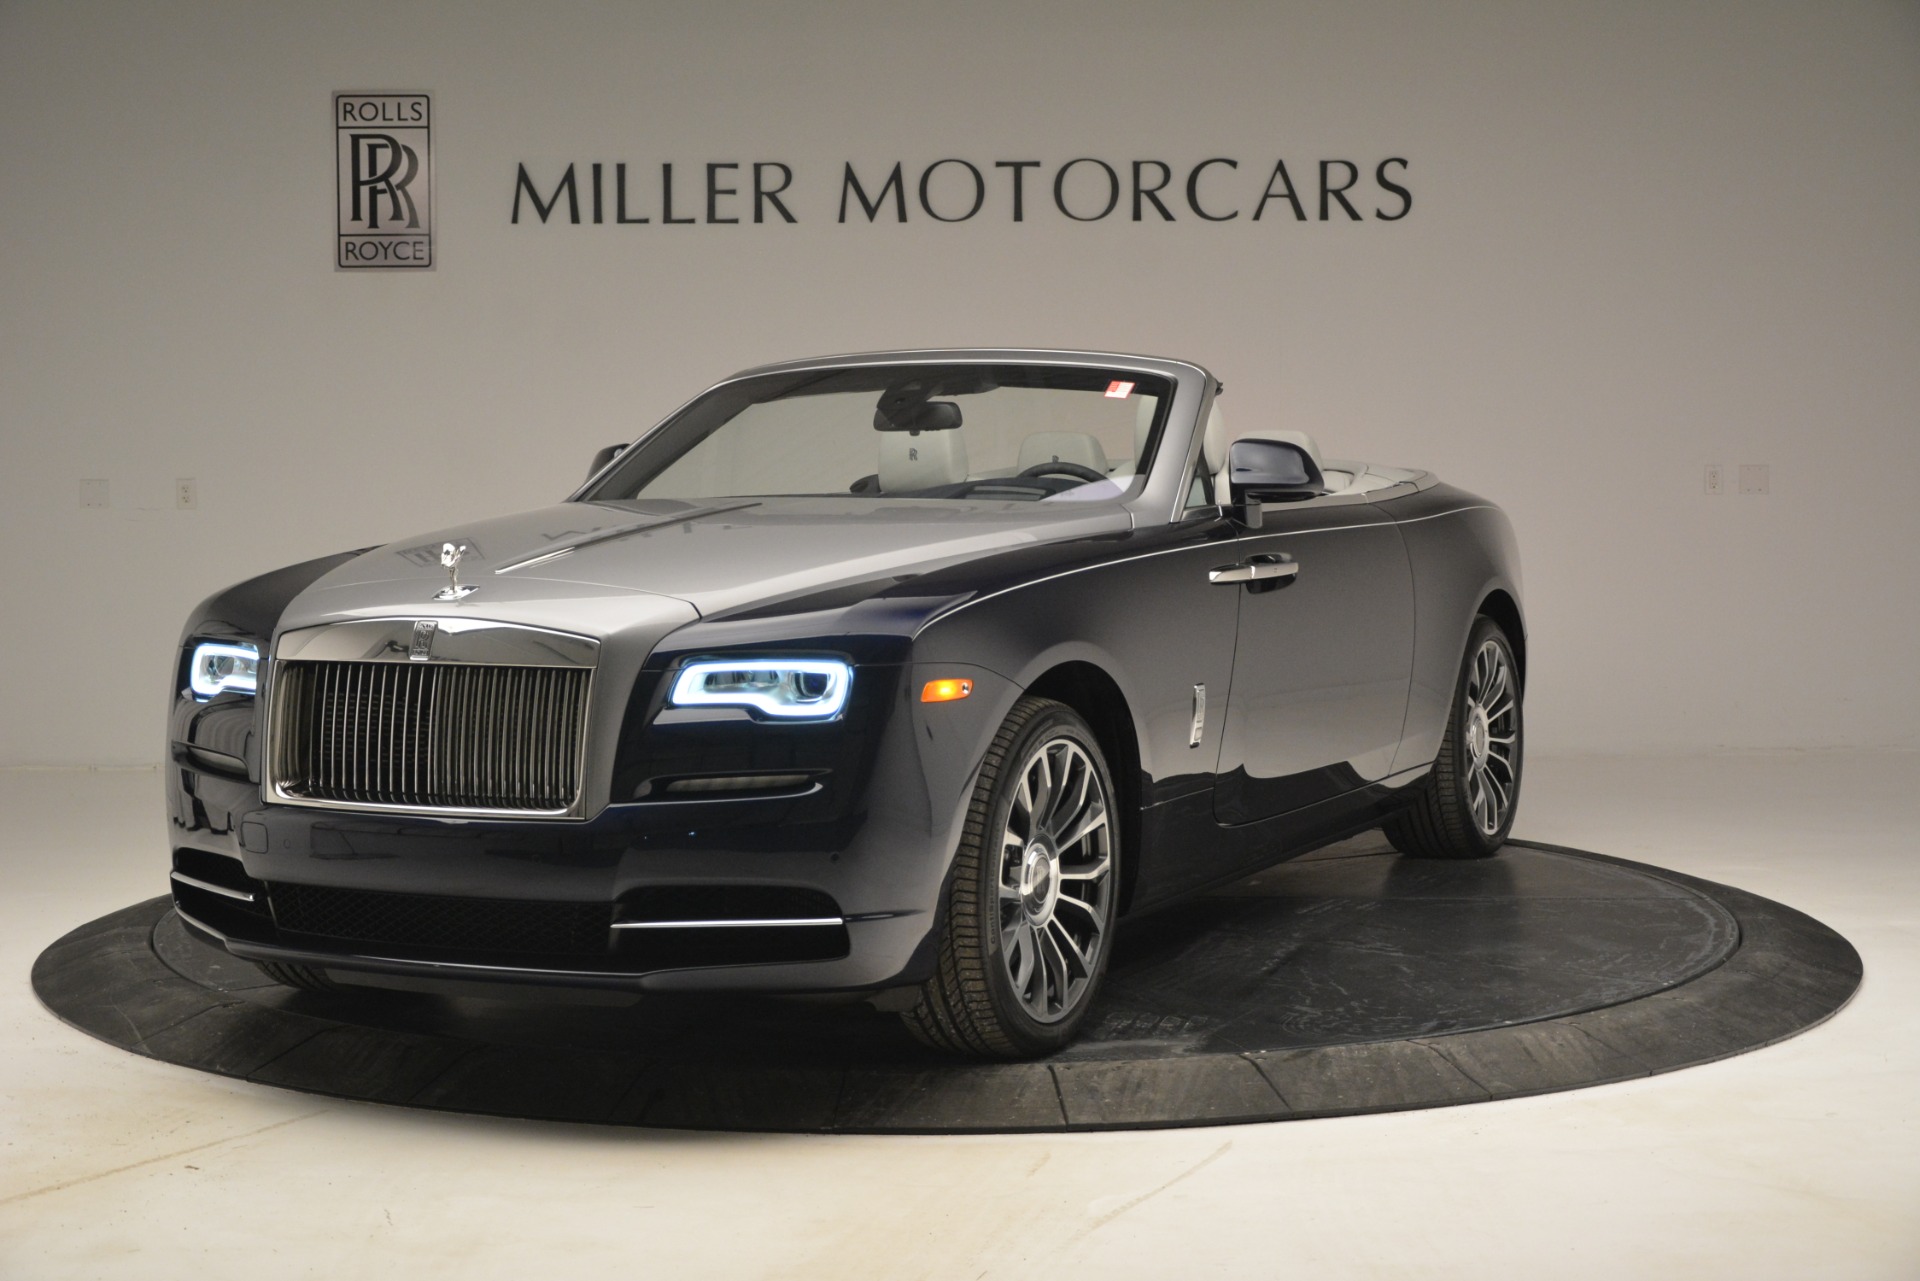 New 2019 Rolls-Royce Dawn for sale Sold at Alfa Romeo of Greenwich in Greenwich CT 06830 1